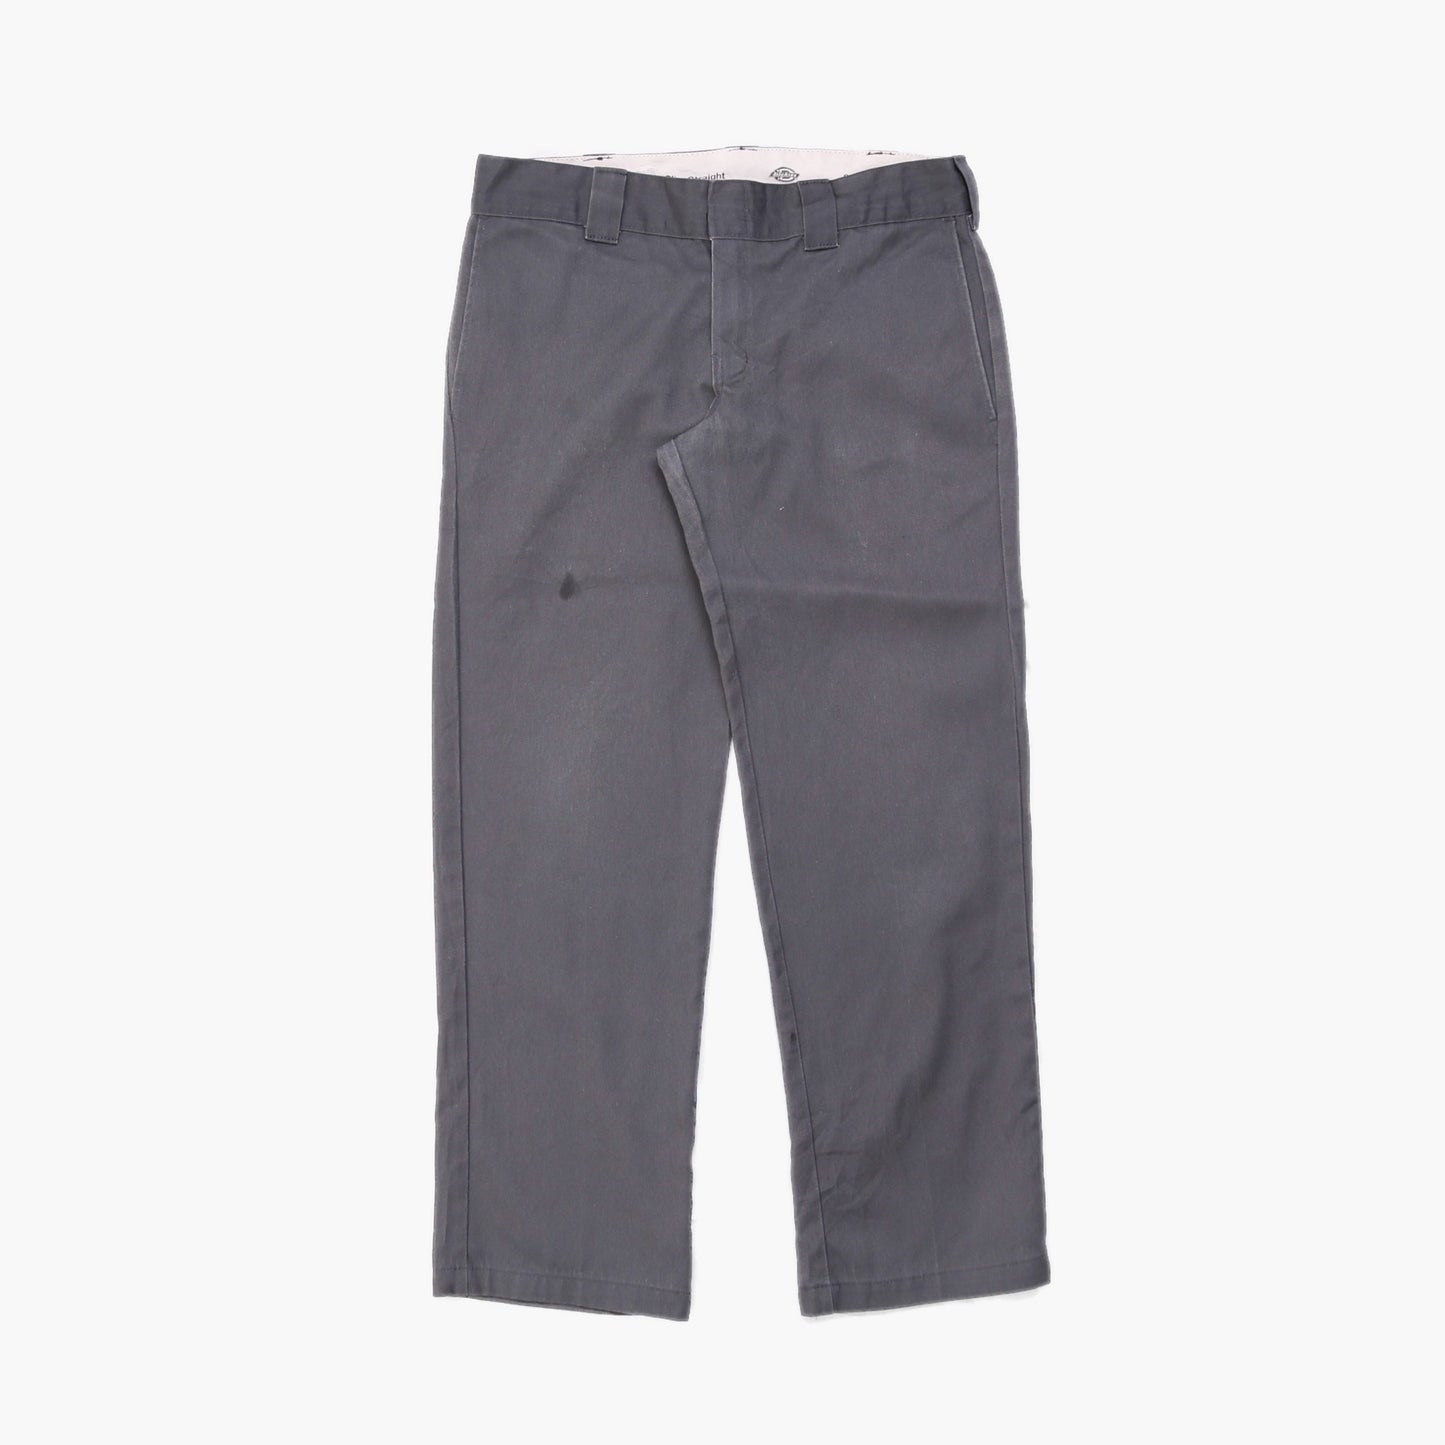 874 Work Trousers -Grey - 32/30 - American Madness